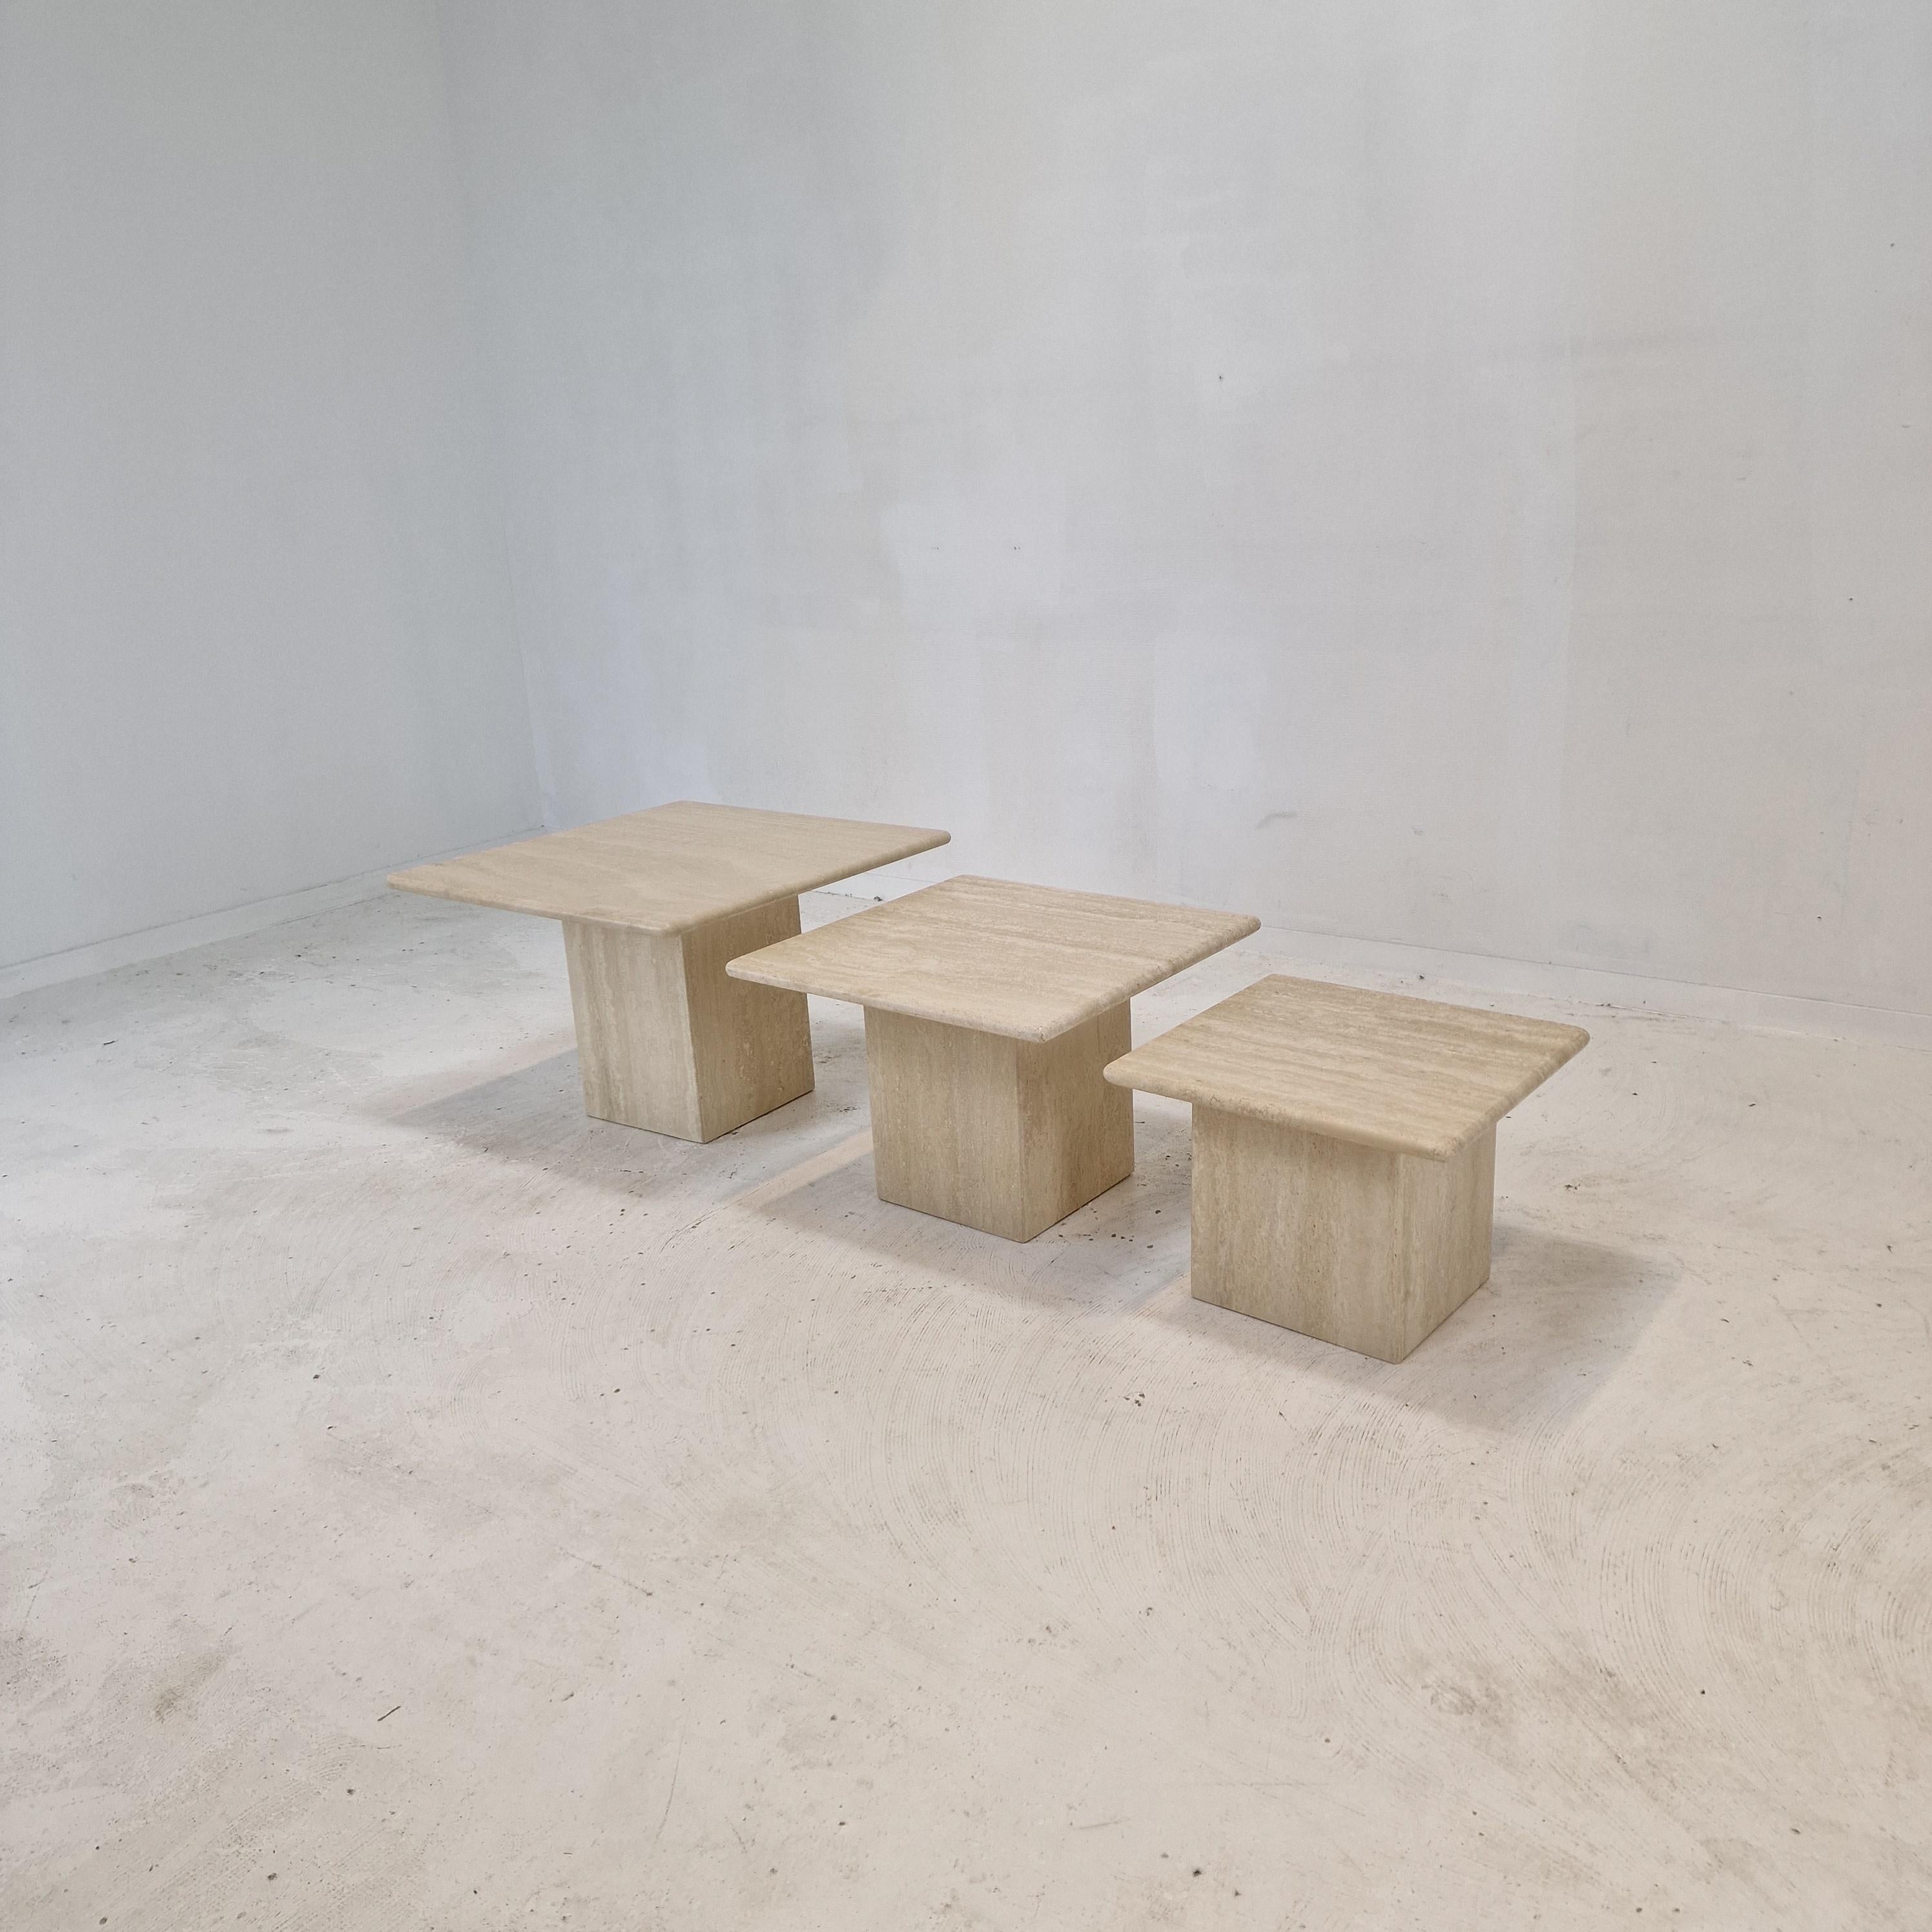 Late 20th Century Set of 3 Italian Travertine Coffee or Side Tables, 1980s For Sale